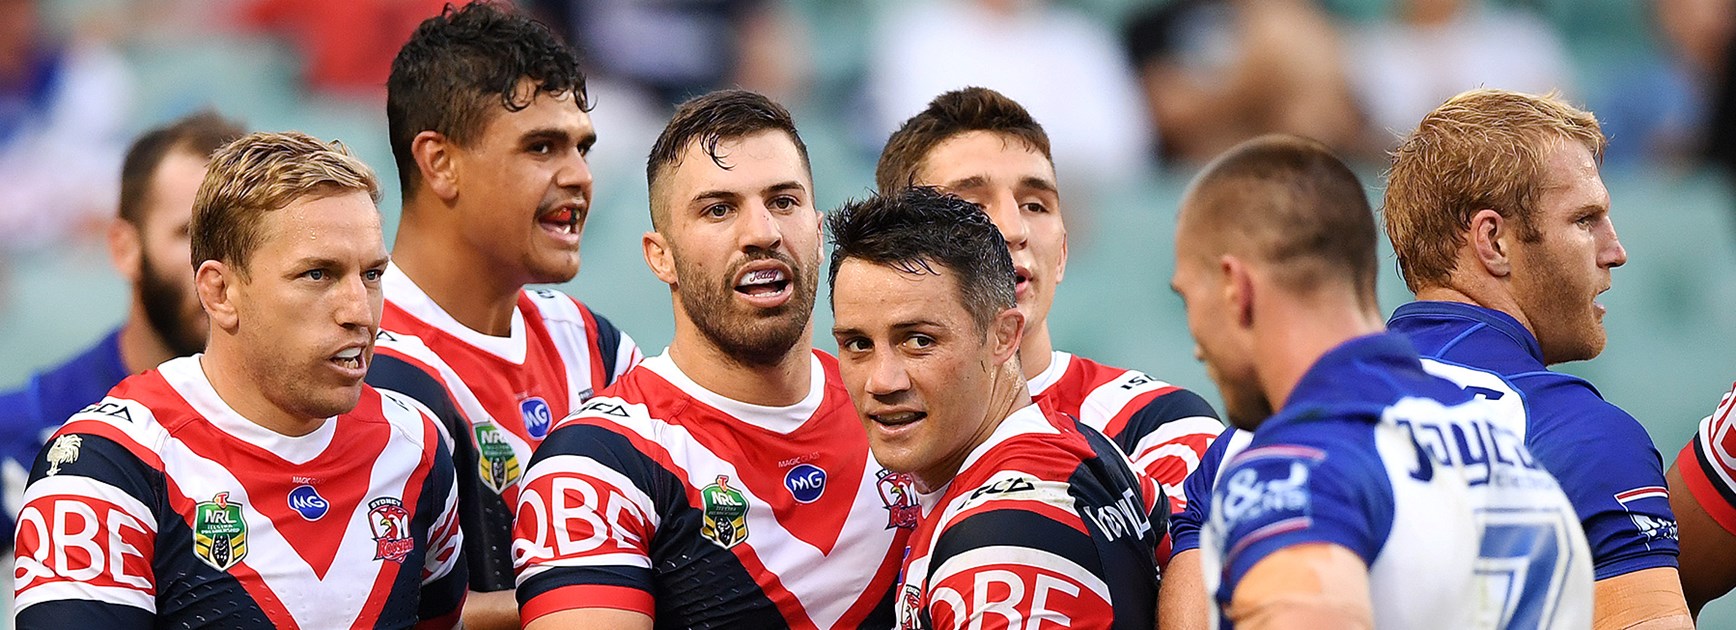 Game In Focus | Roosters v Bulldogs